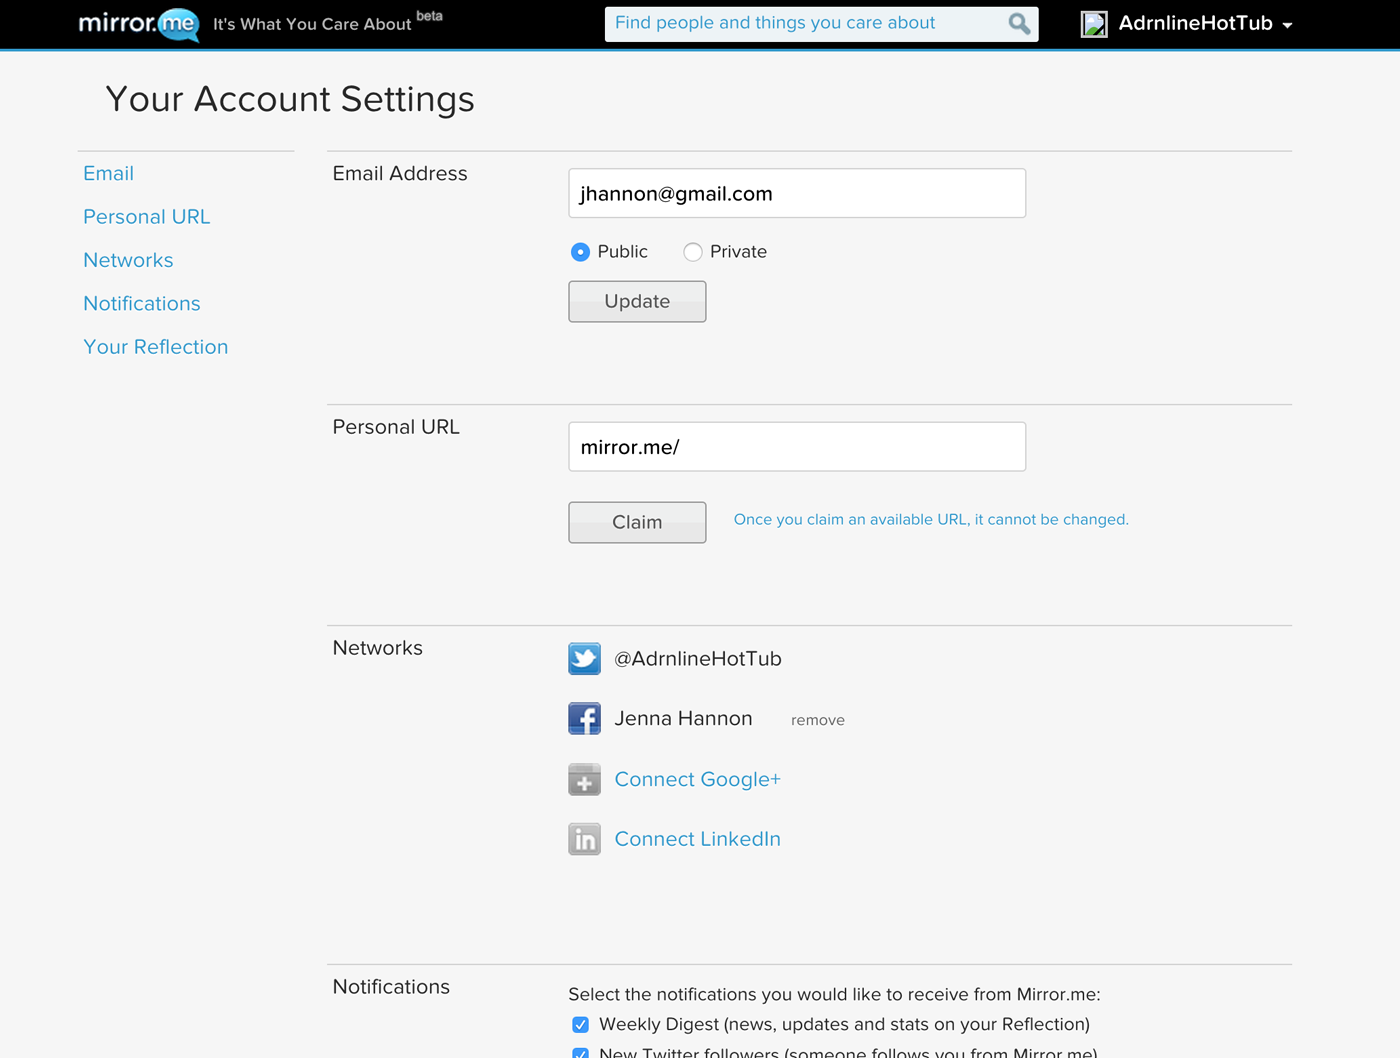 mirror.me settings page